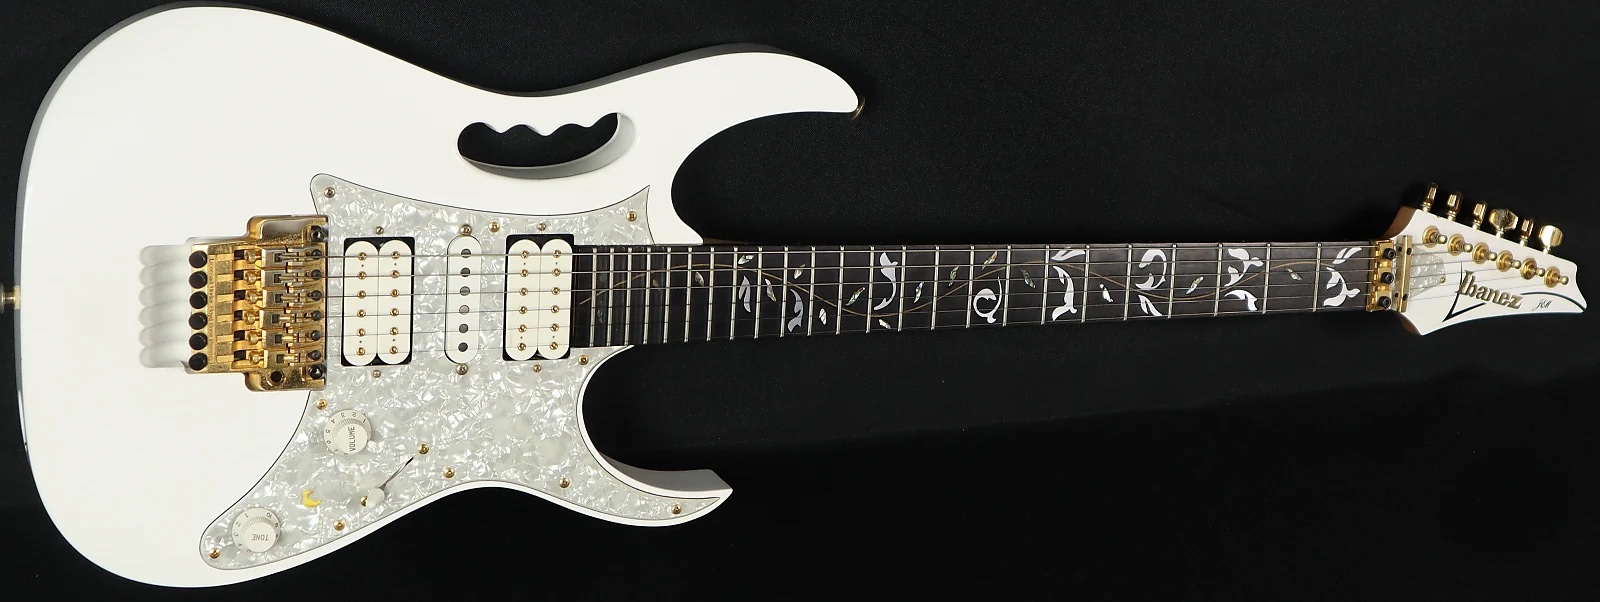 An Ibanez JEM7V-WH once owned and played by Steve Vai